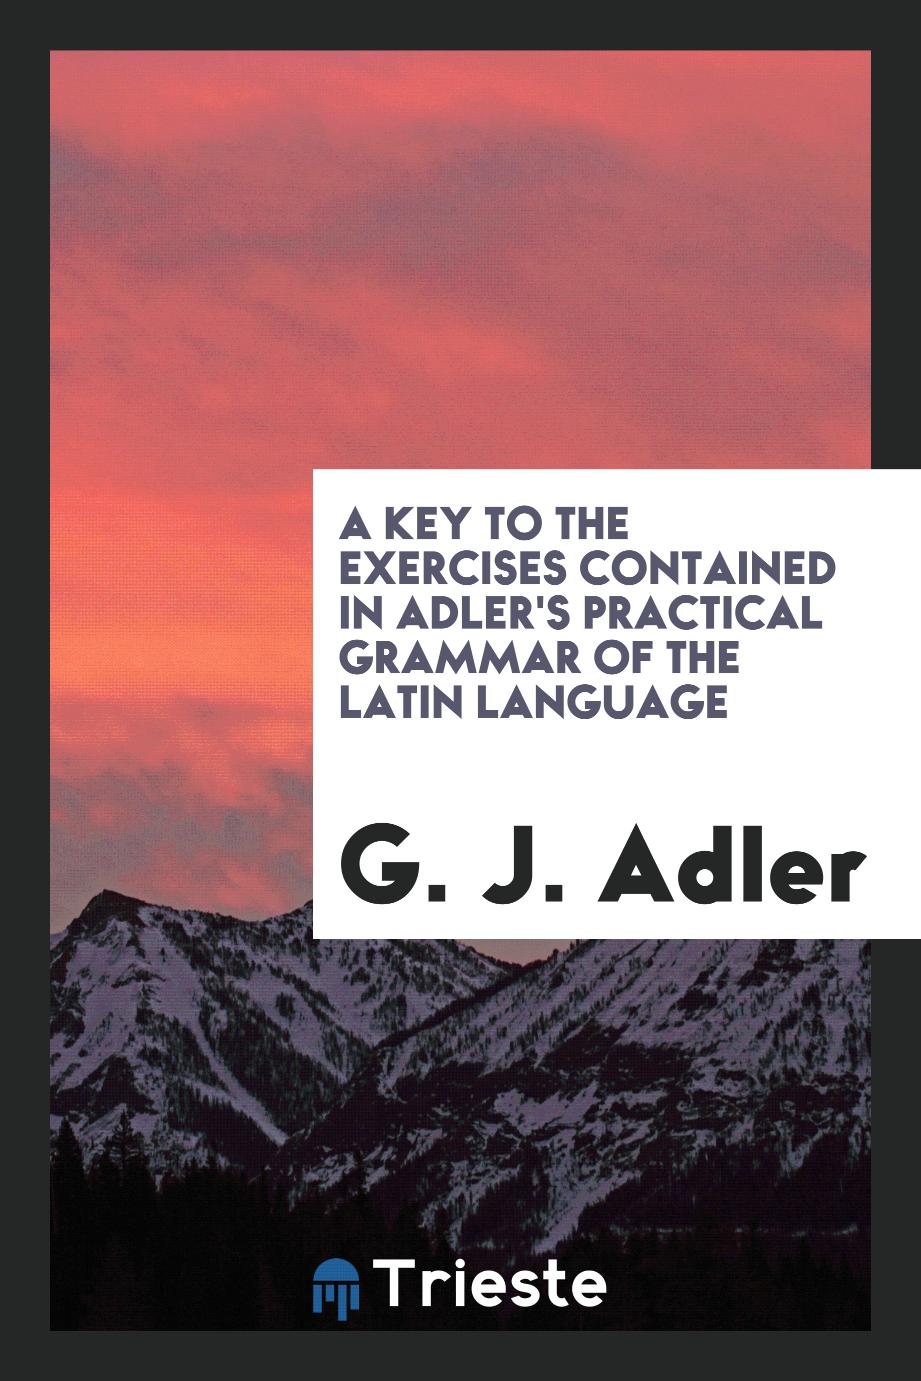 A Key to the Exercises Contained in Adler's Practical Grammar of the Latin Language